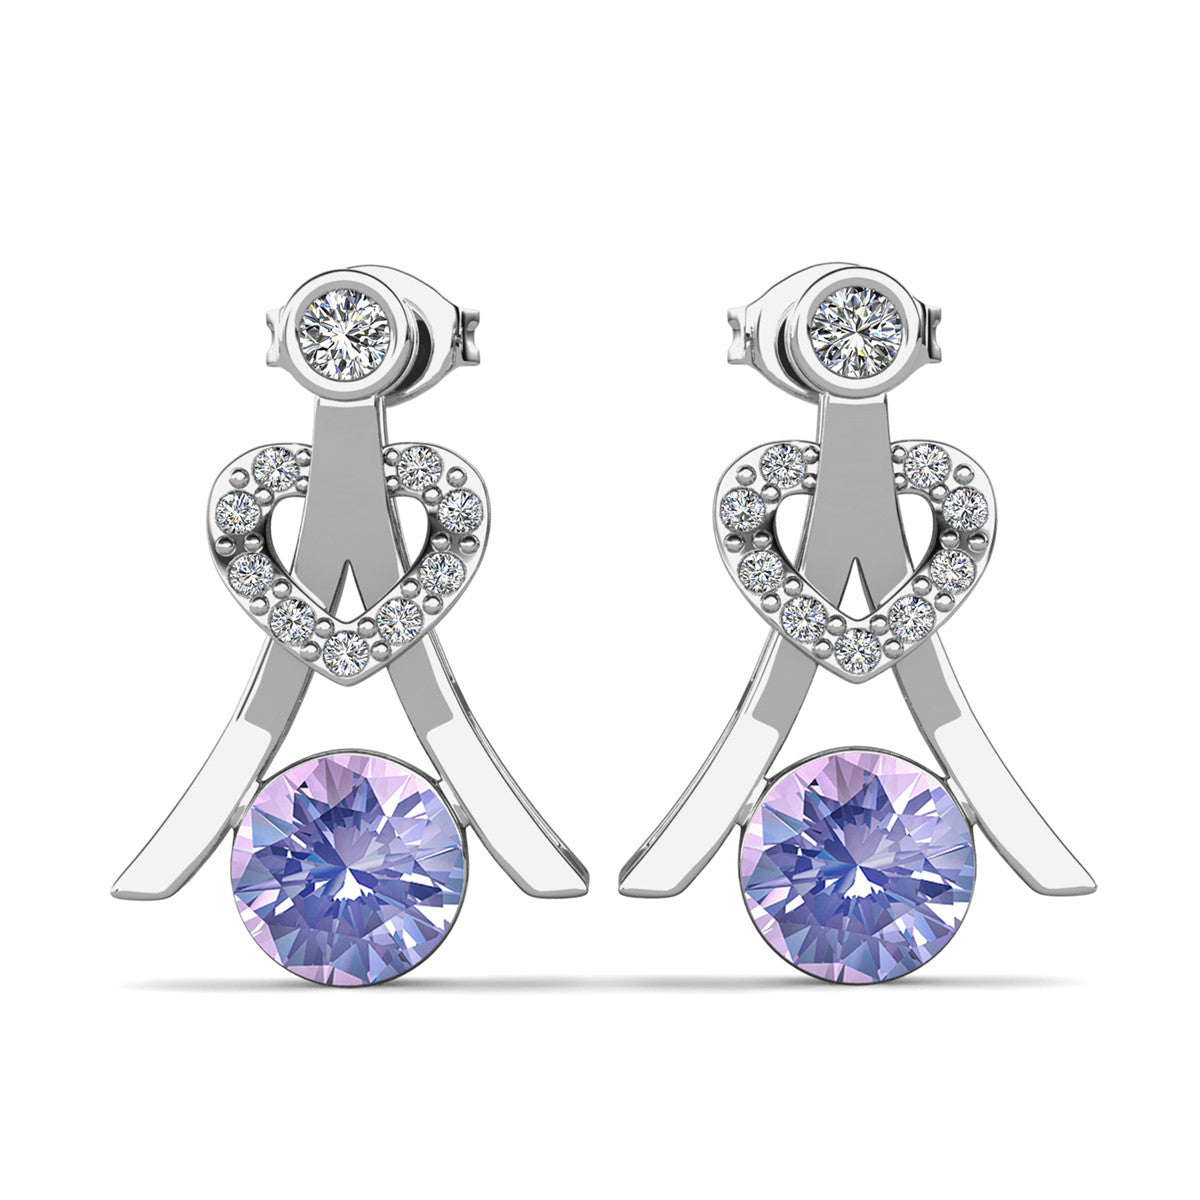 Serenity June Birthstone Alexandrite Earrings,  18k White Gold Plated Silver Earrings with Round Cut Crystals